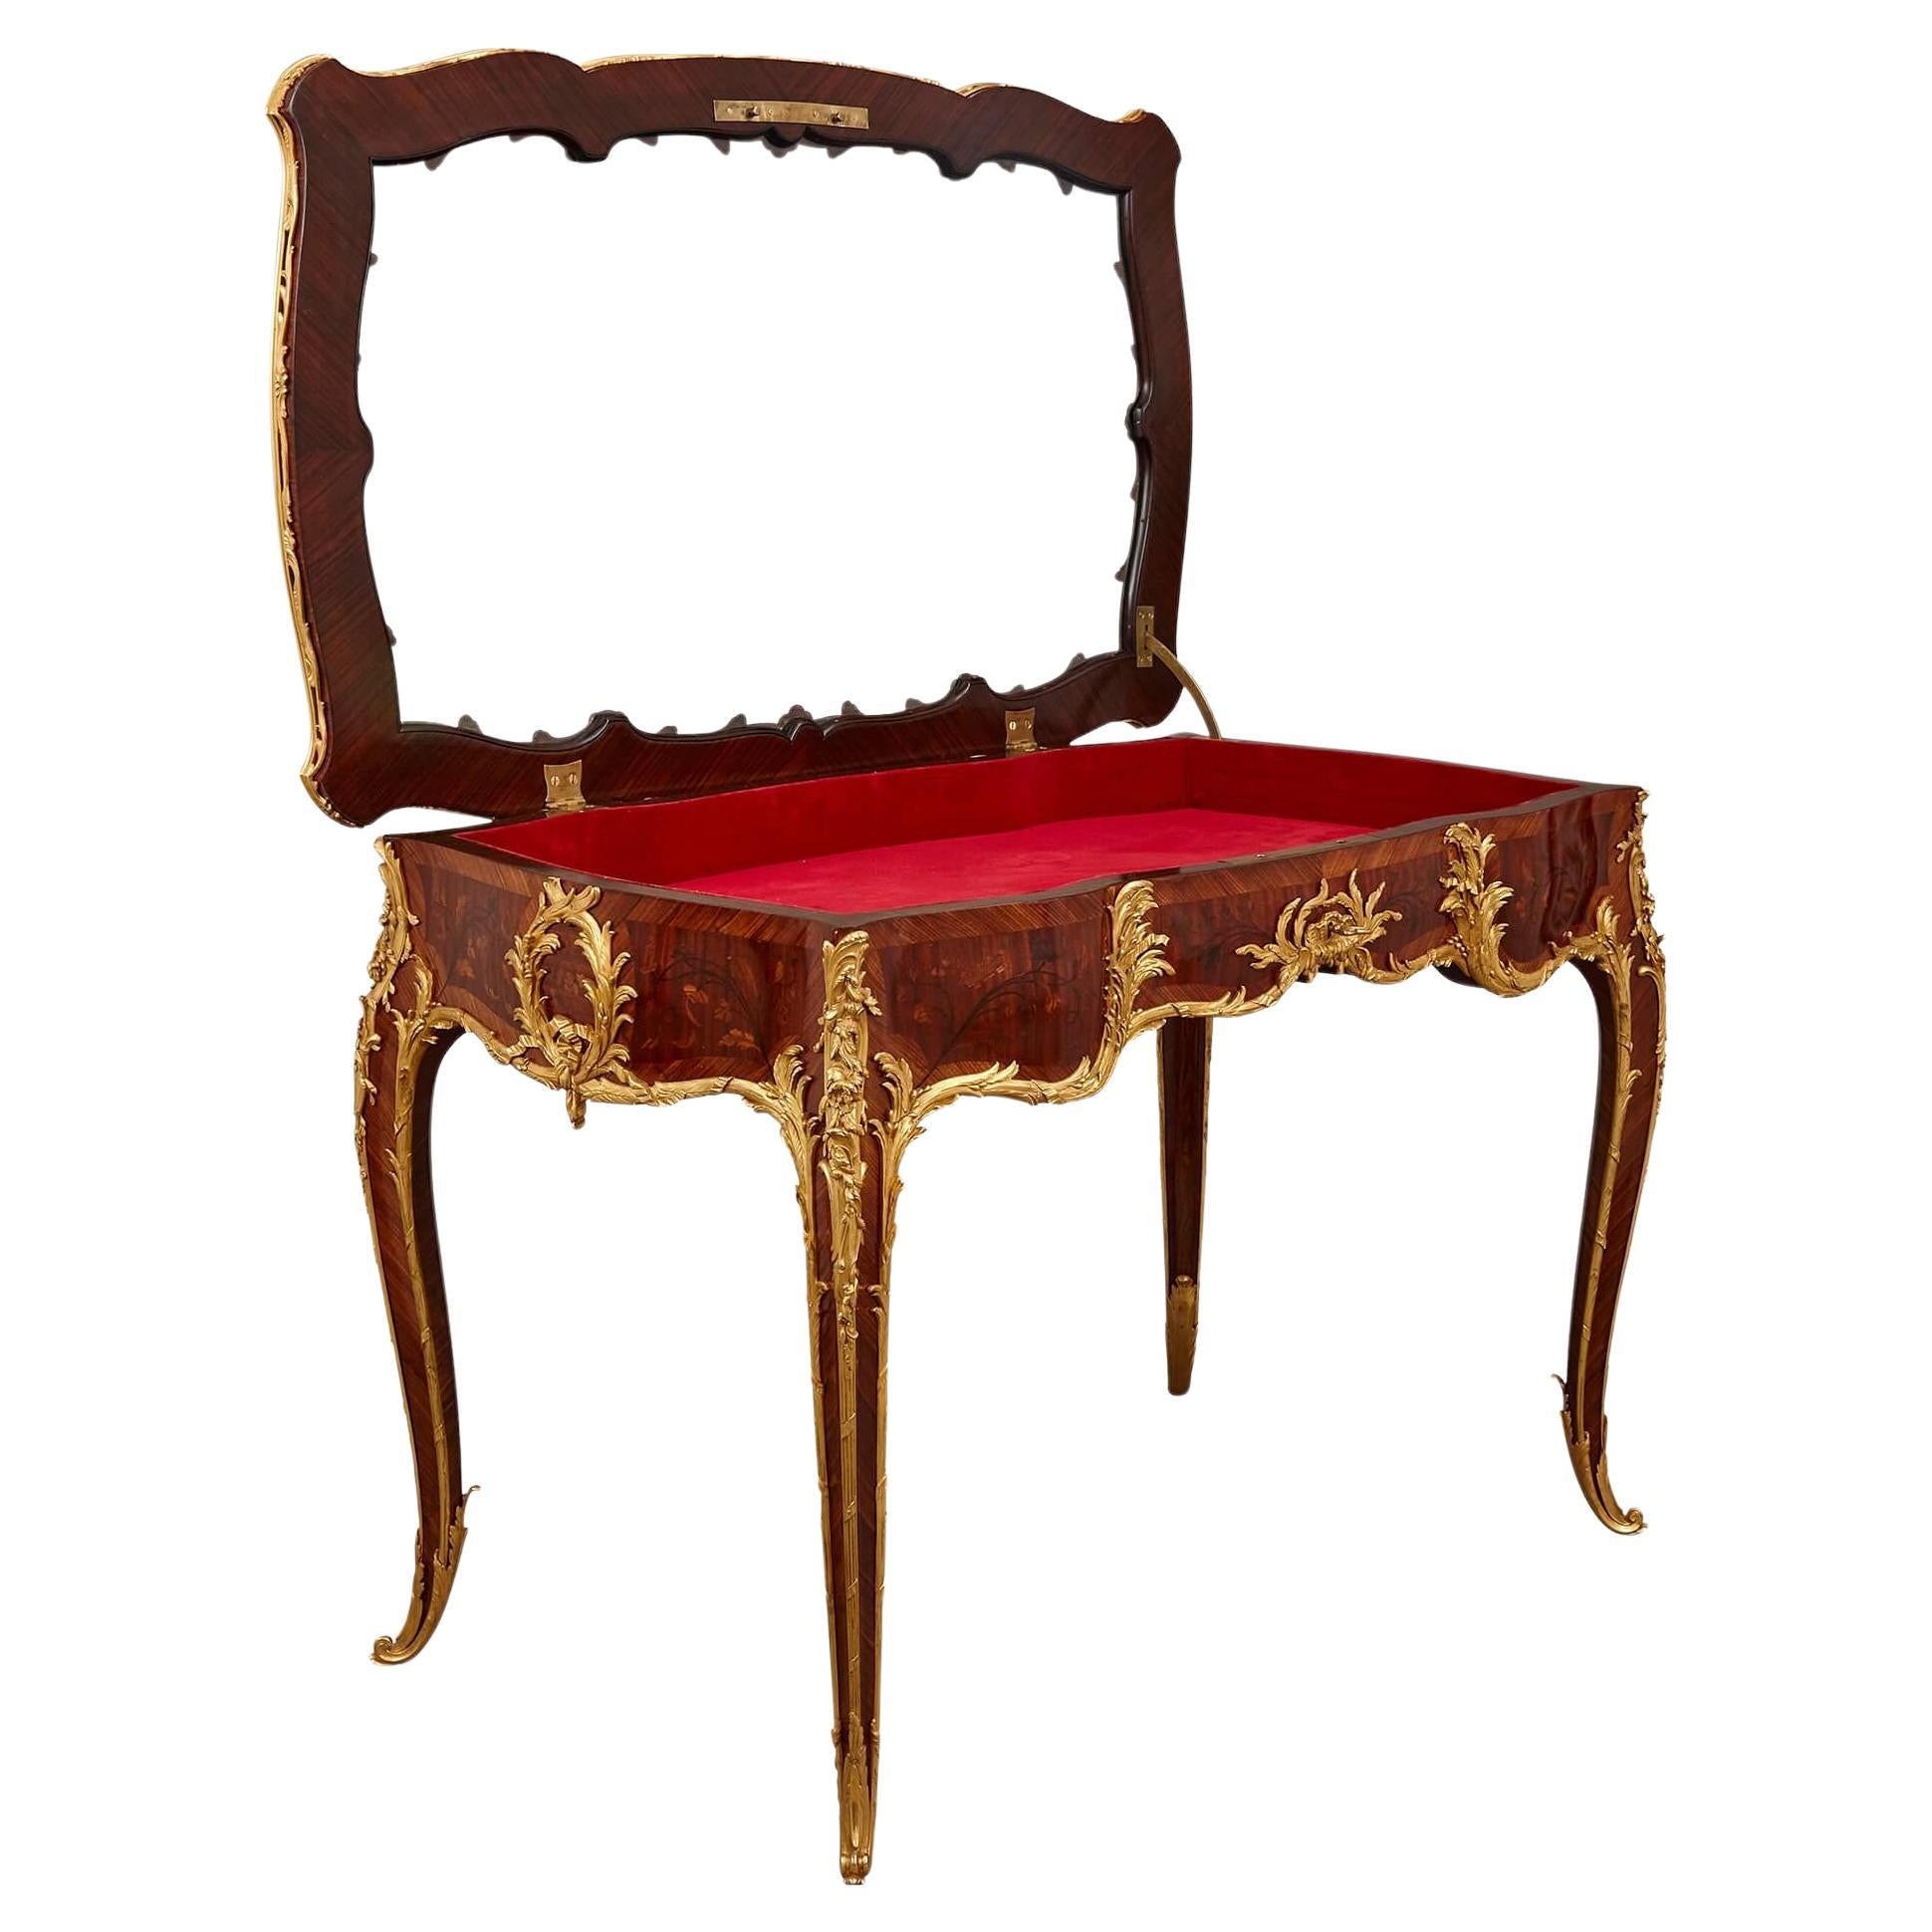 A large Louis XV style ormolu mounted marquetry table vitrine by Linke